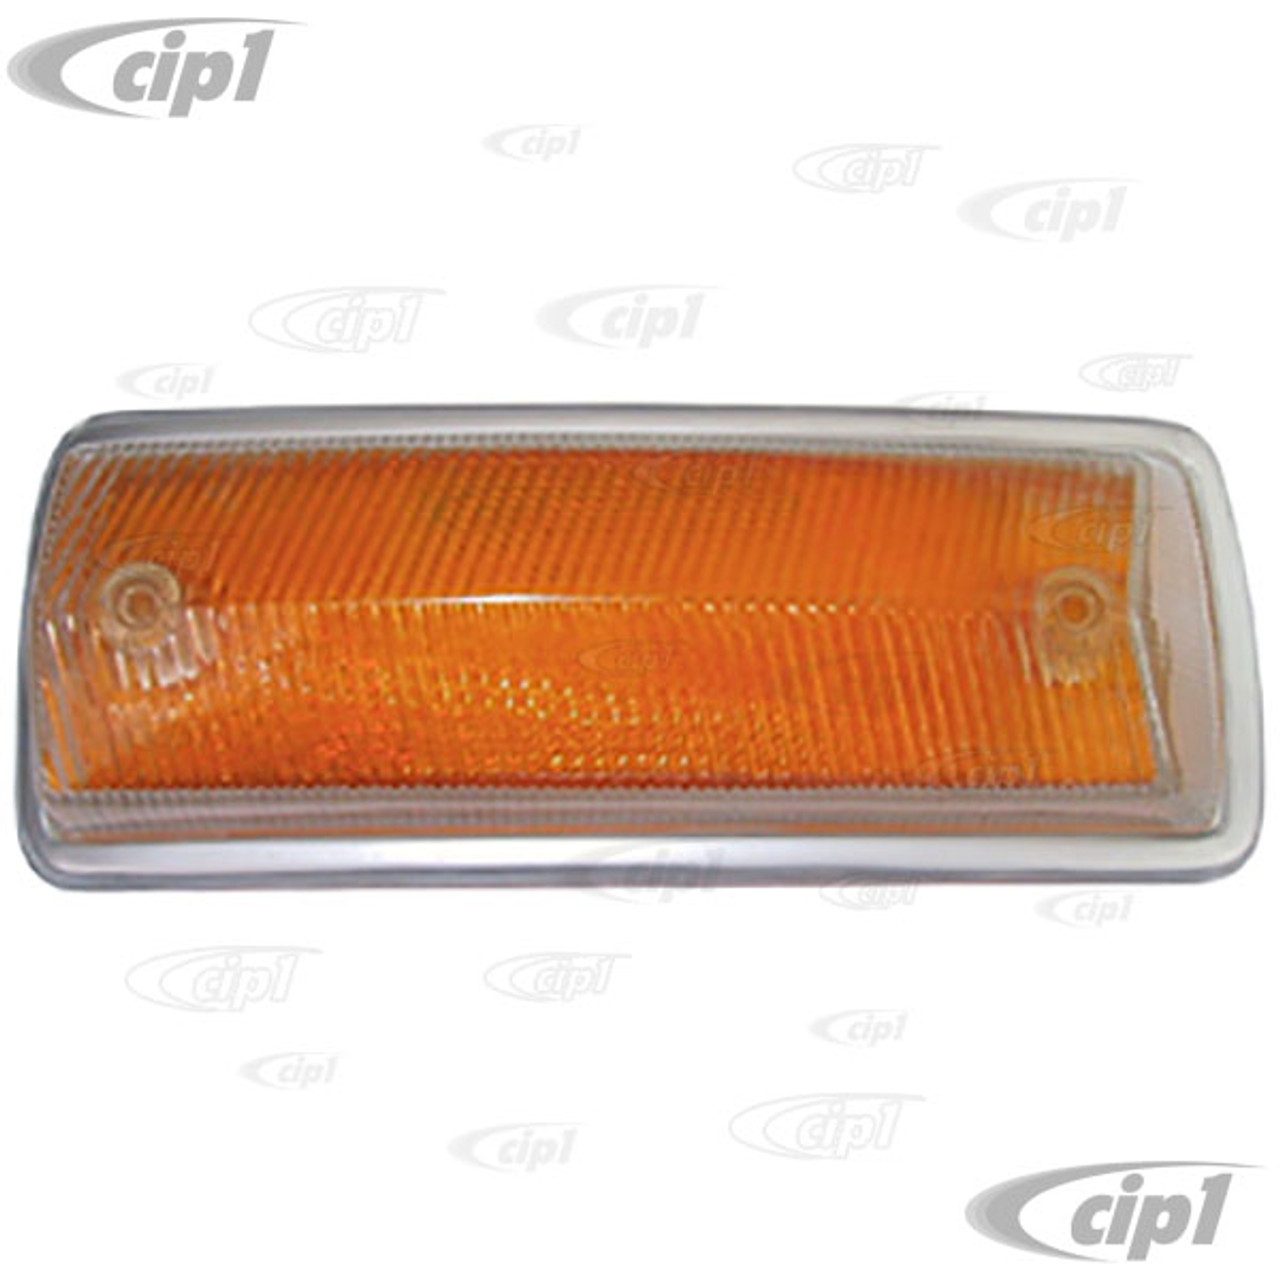 VWC-211-953-141-P - (211953141P) - NICE REPRODUCTION - FRONT TURN SIGNAL  LENS - FITS LEFT OR RIGHT - AMBER WITH SILVER TRIM - BUS 68-72 - SOLD EACH